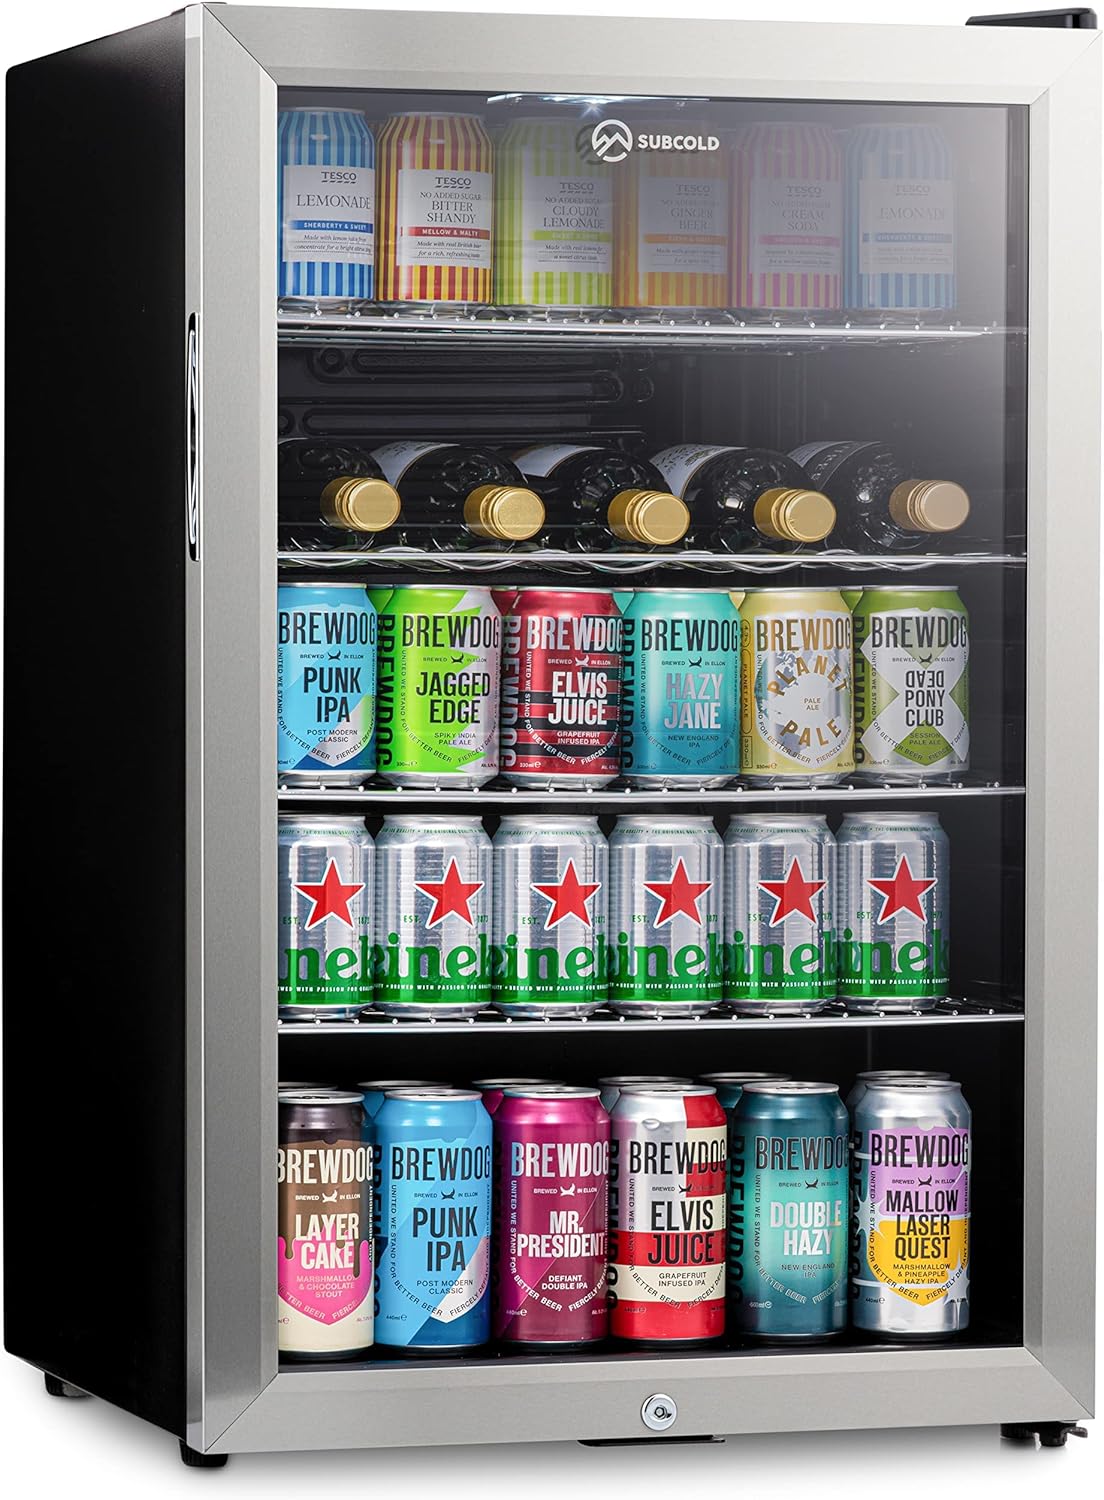 Subcold Super115 LED - Under - Counter Fridge | 115L Beer, Wine & Drinks Fridge | LED Light + Lock and Key | Energy Efficient (Stainless Steel, 115L) - Amazing Gadgets Outlet